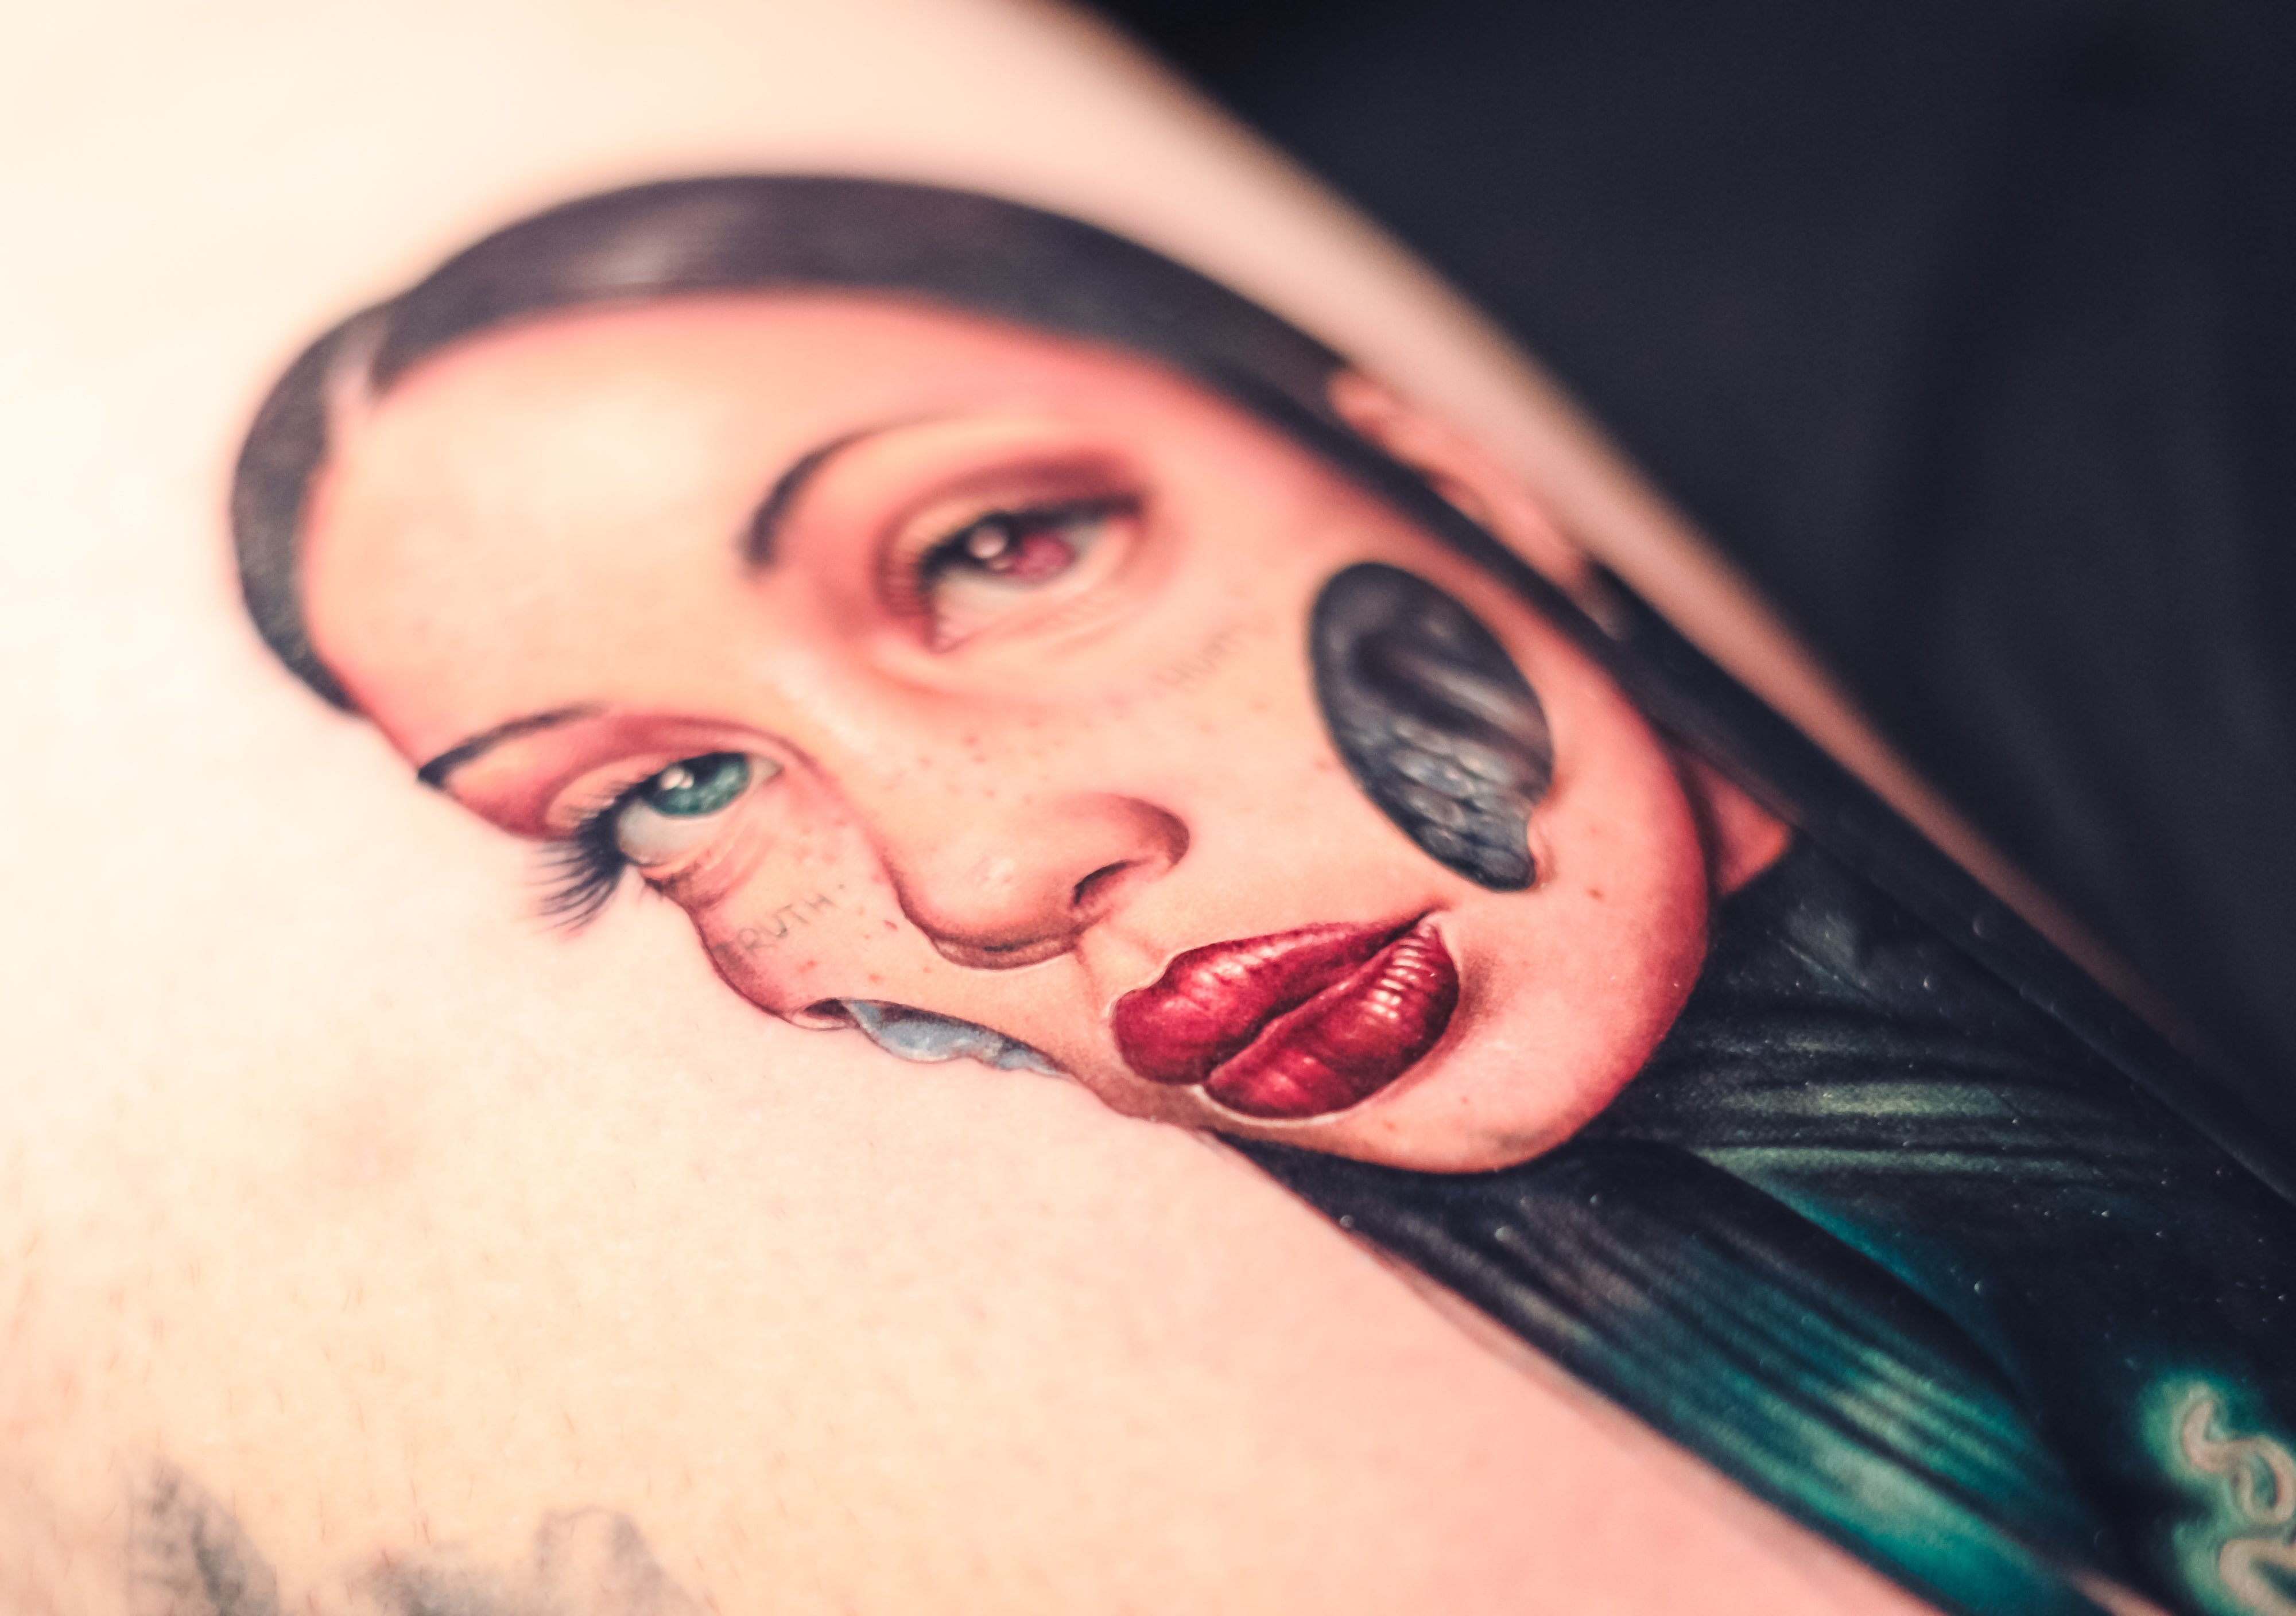 World famous faces in realistic tattoos by Sergio Fernandez | iNKPPL